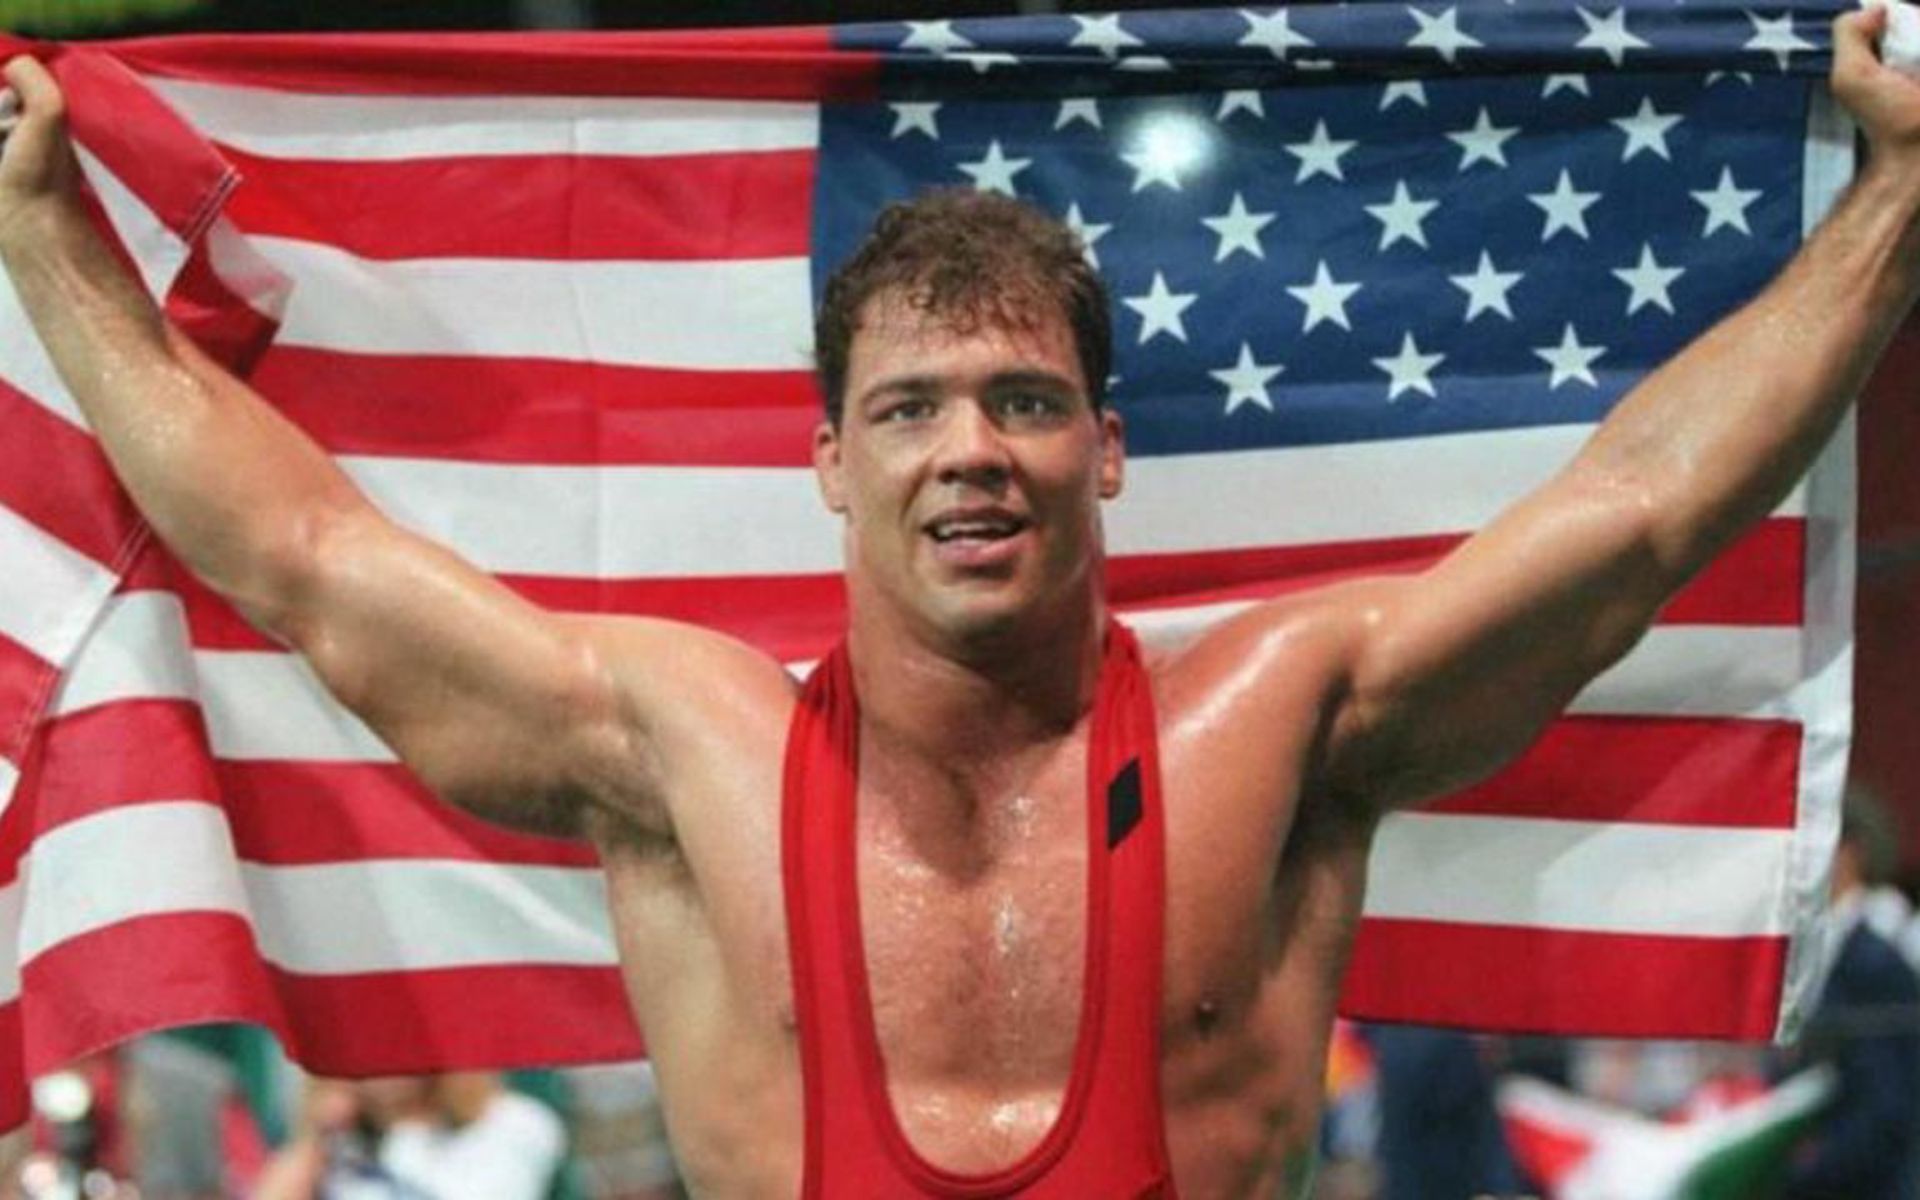 Kurt Angle won an Olympic gold medal with a broken neck!